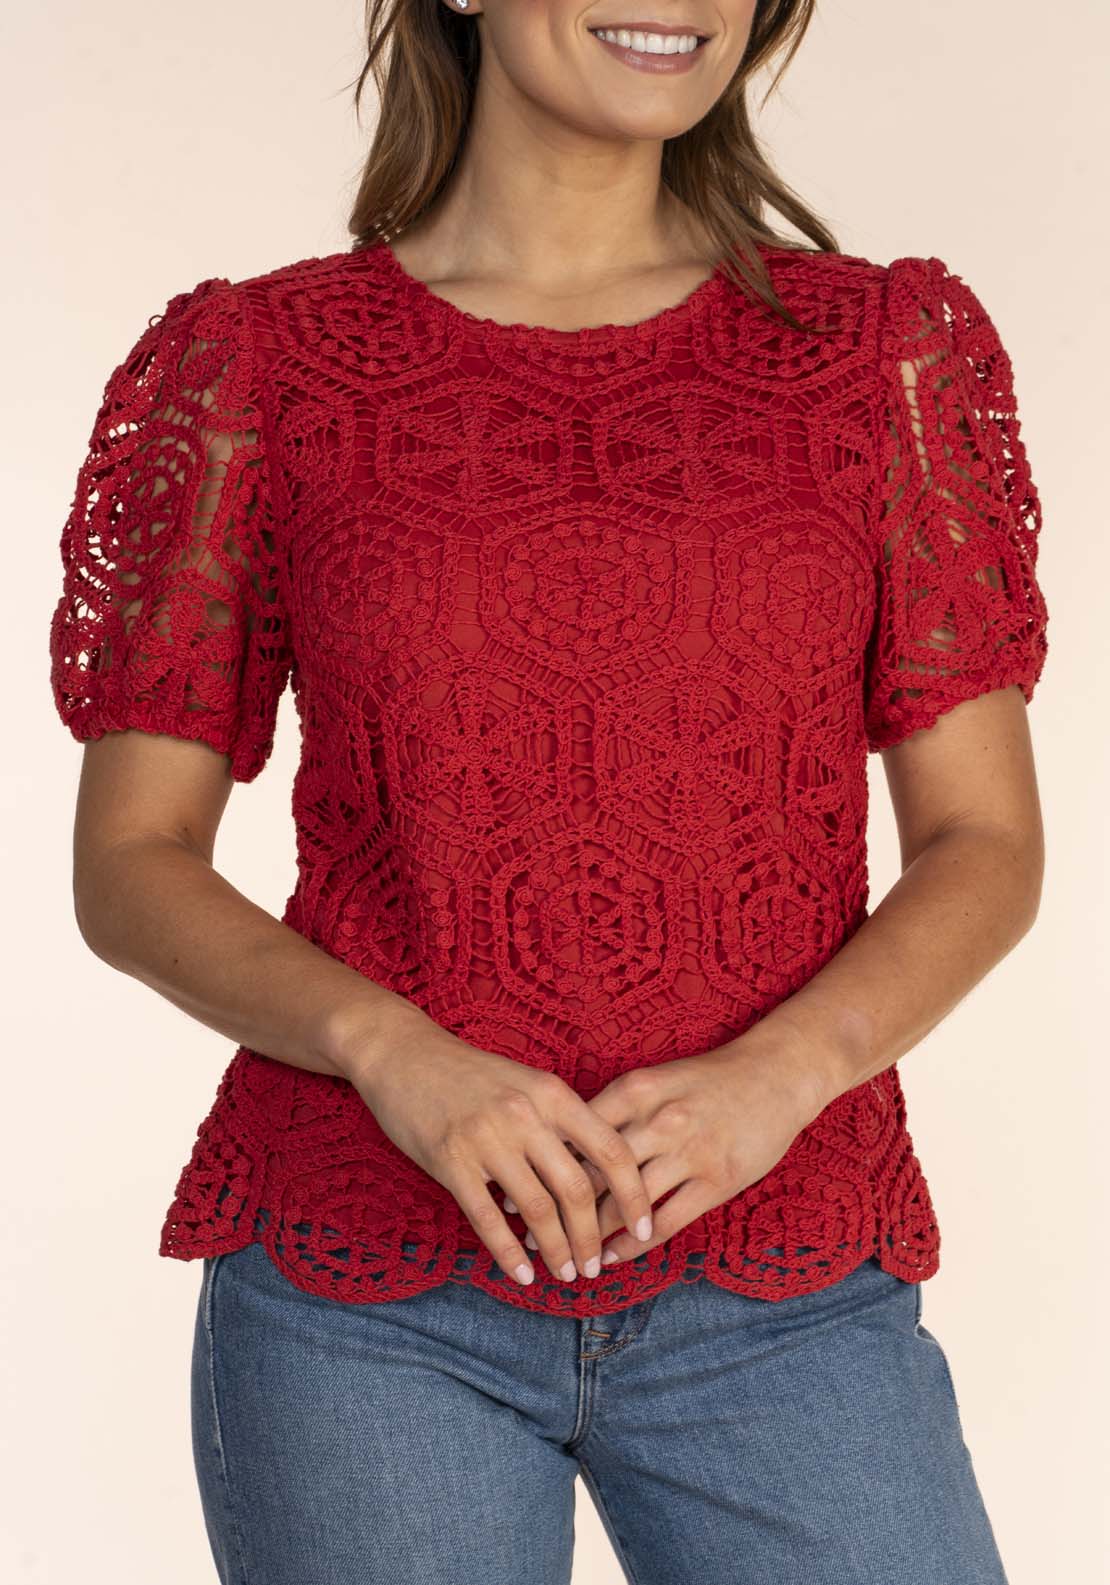 Naoise Crochet Puff Sleeve Top 5 Shaws Department Stores